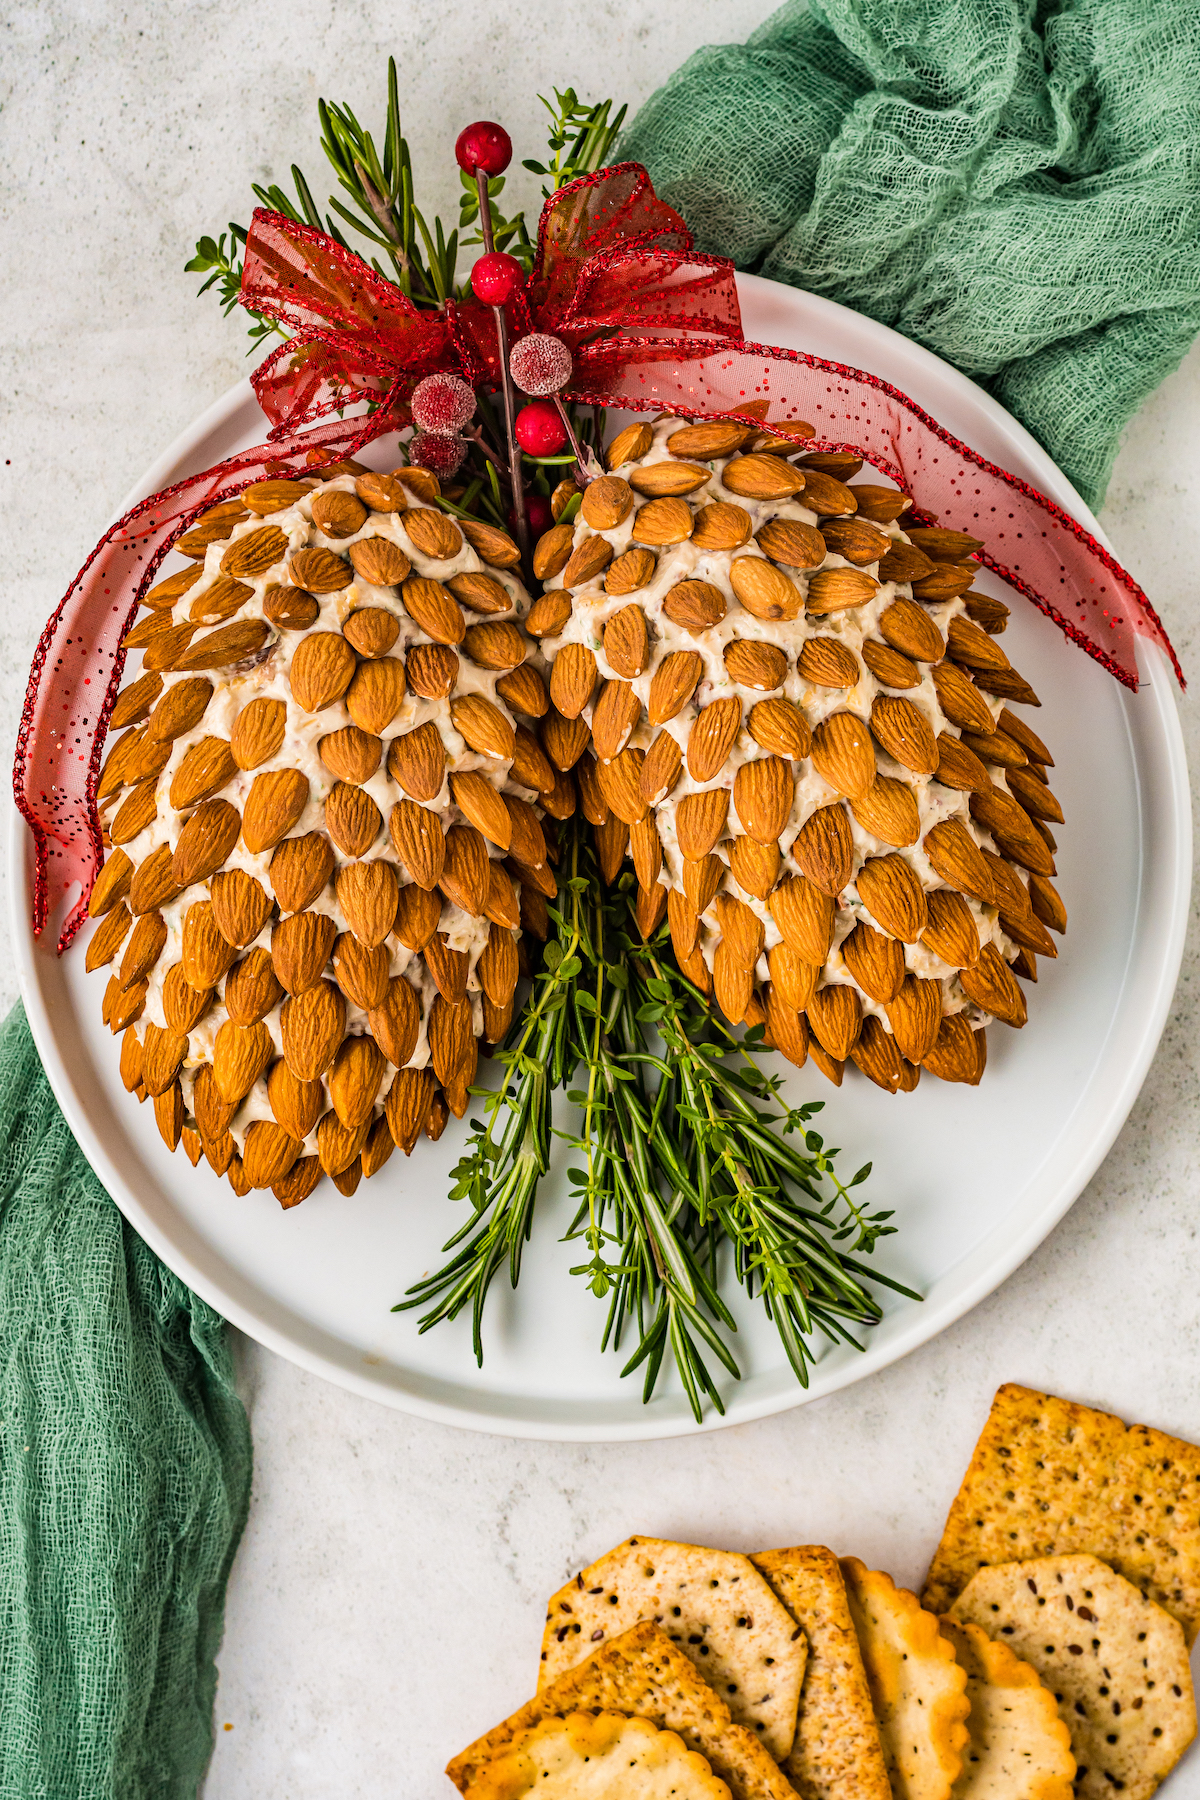 Pine cone cheese ball recipe, made with whole almonds and herbs.